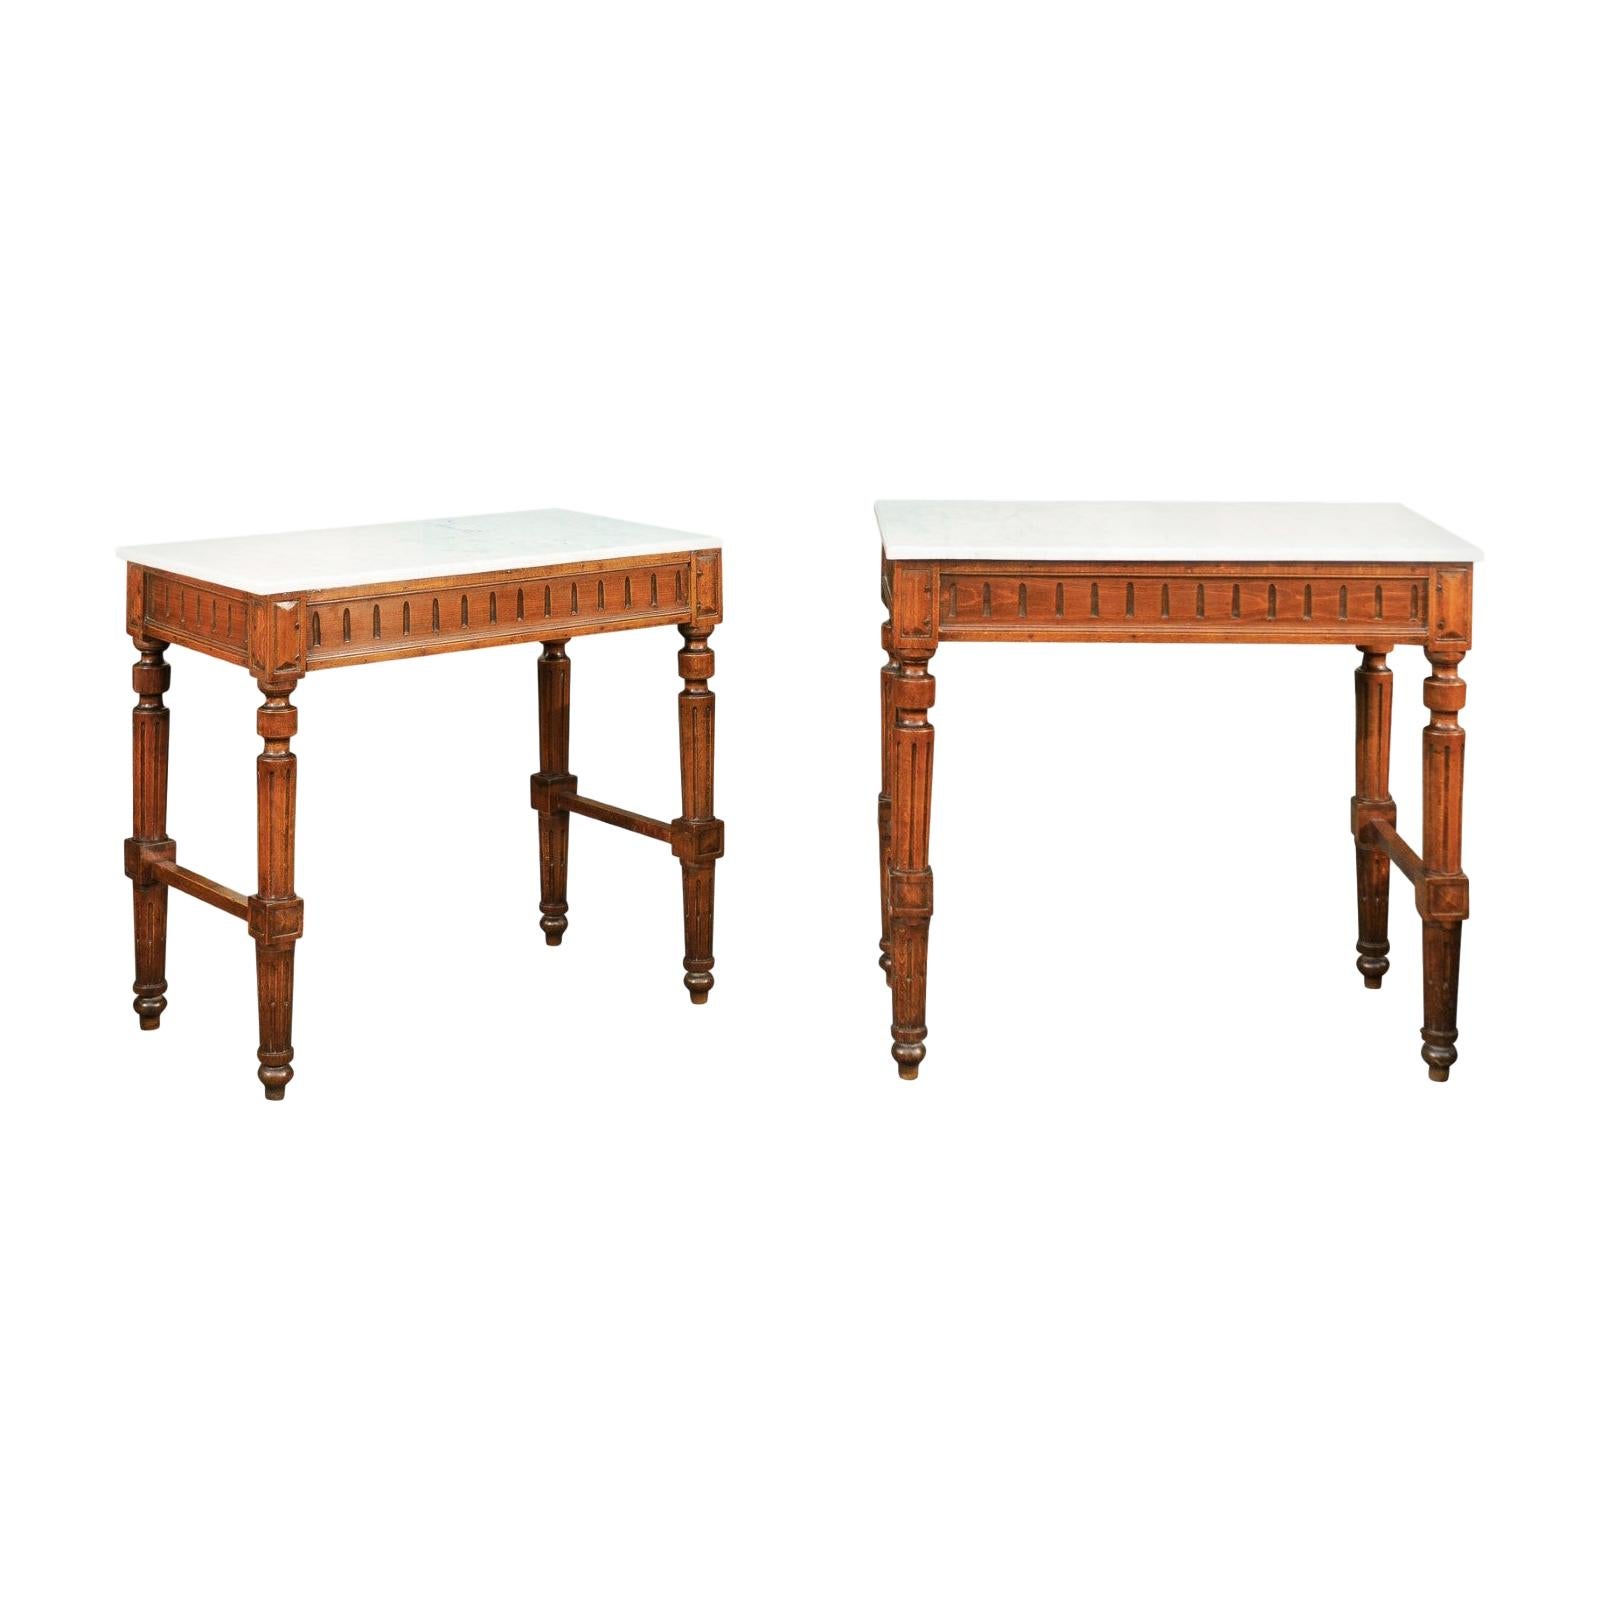 Pair of French 1870s Neoclassical Style Wooden Console Tables with Marble Tops